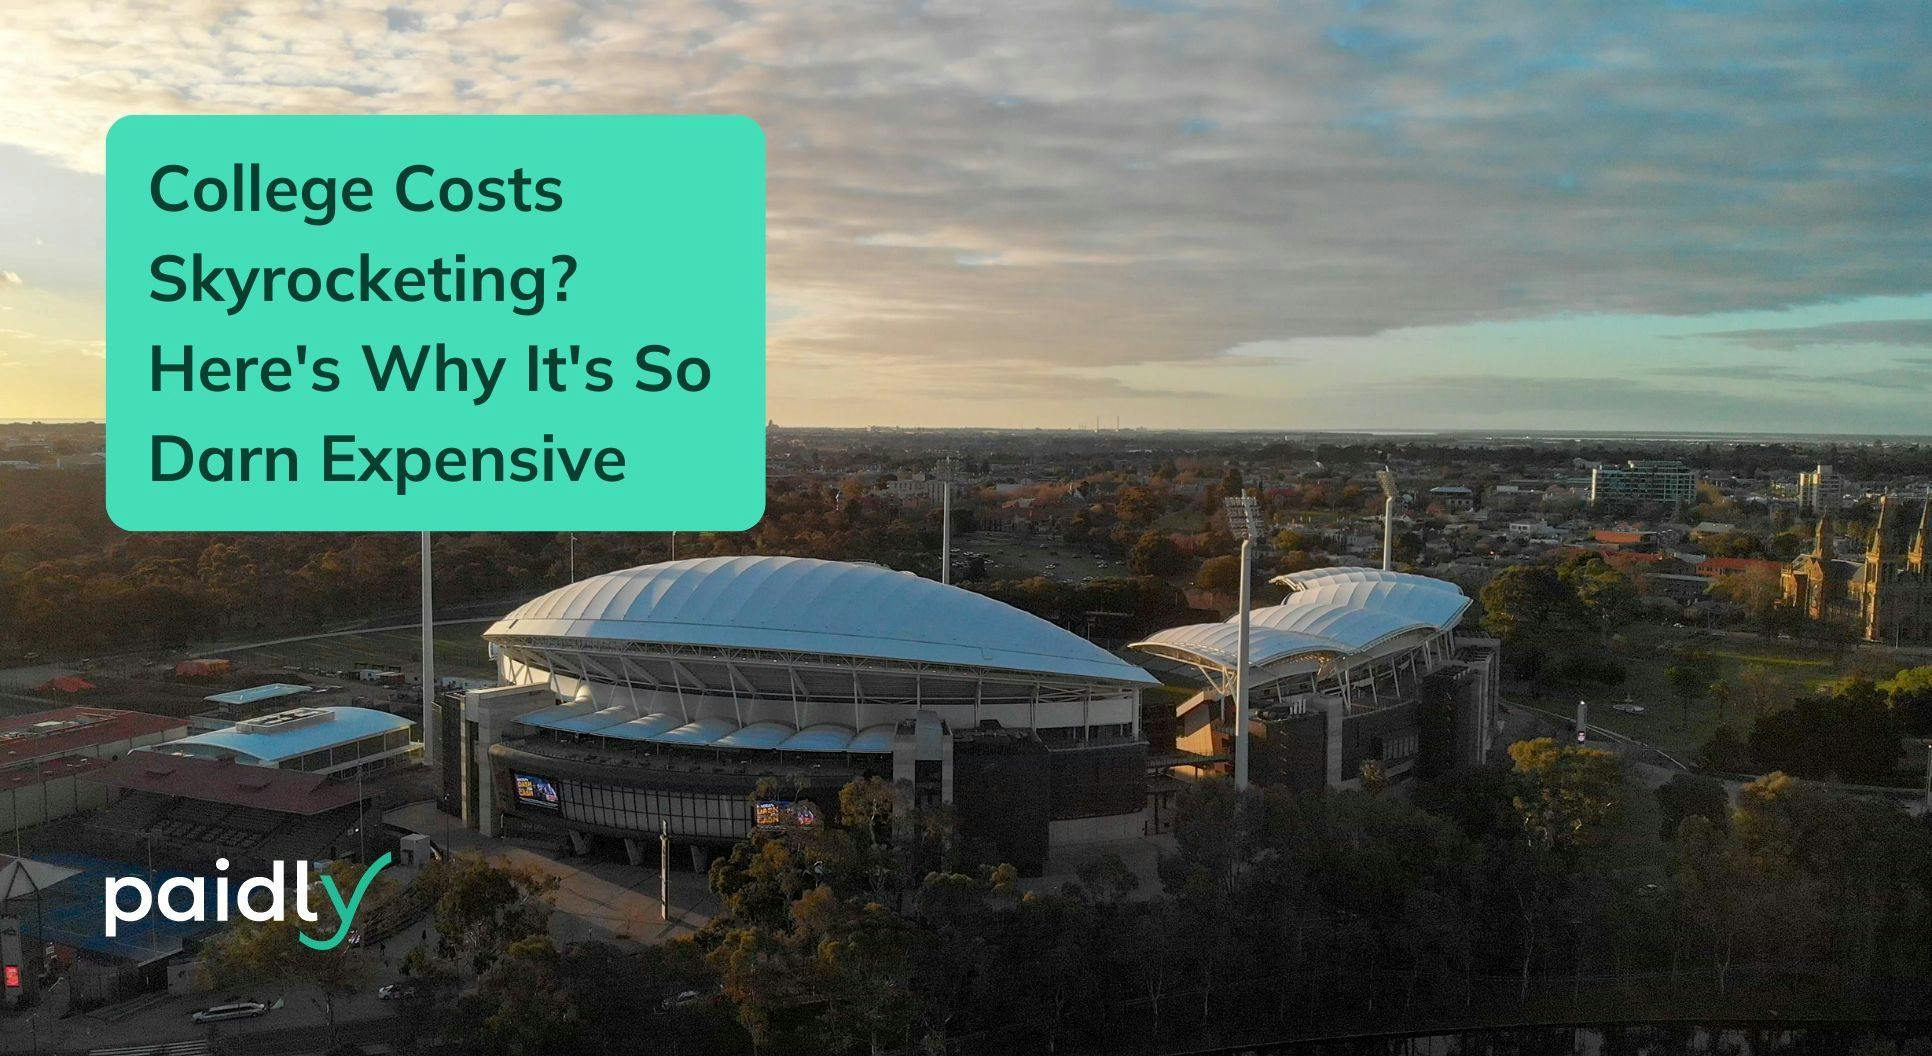 College sports facility , message College Costs Skyrocketing? Here's Why It's So Darn Expensive